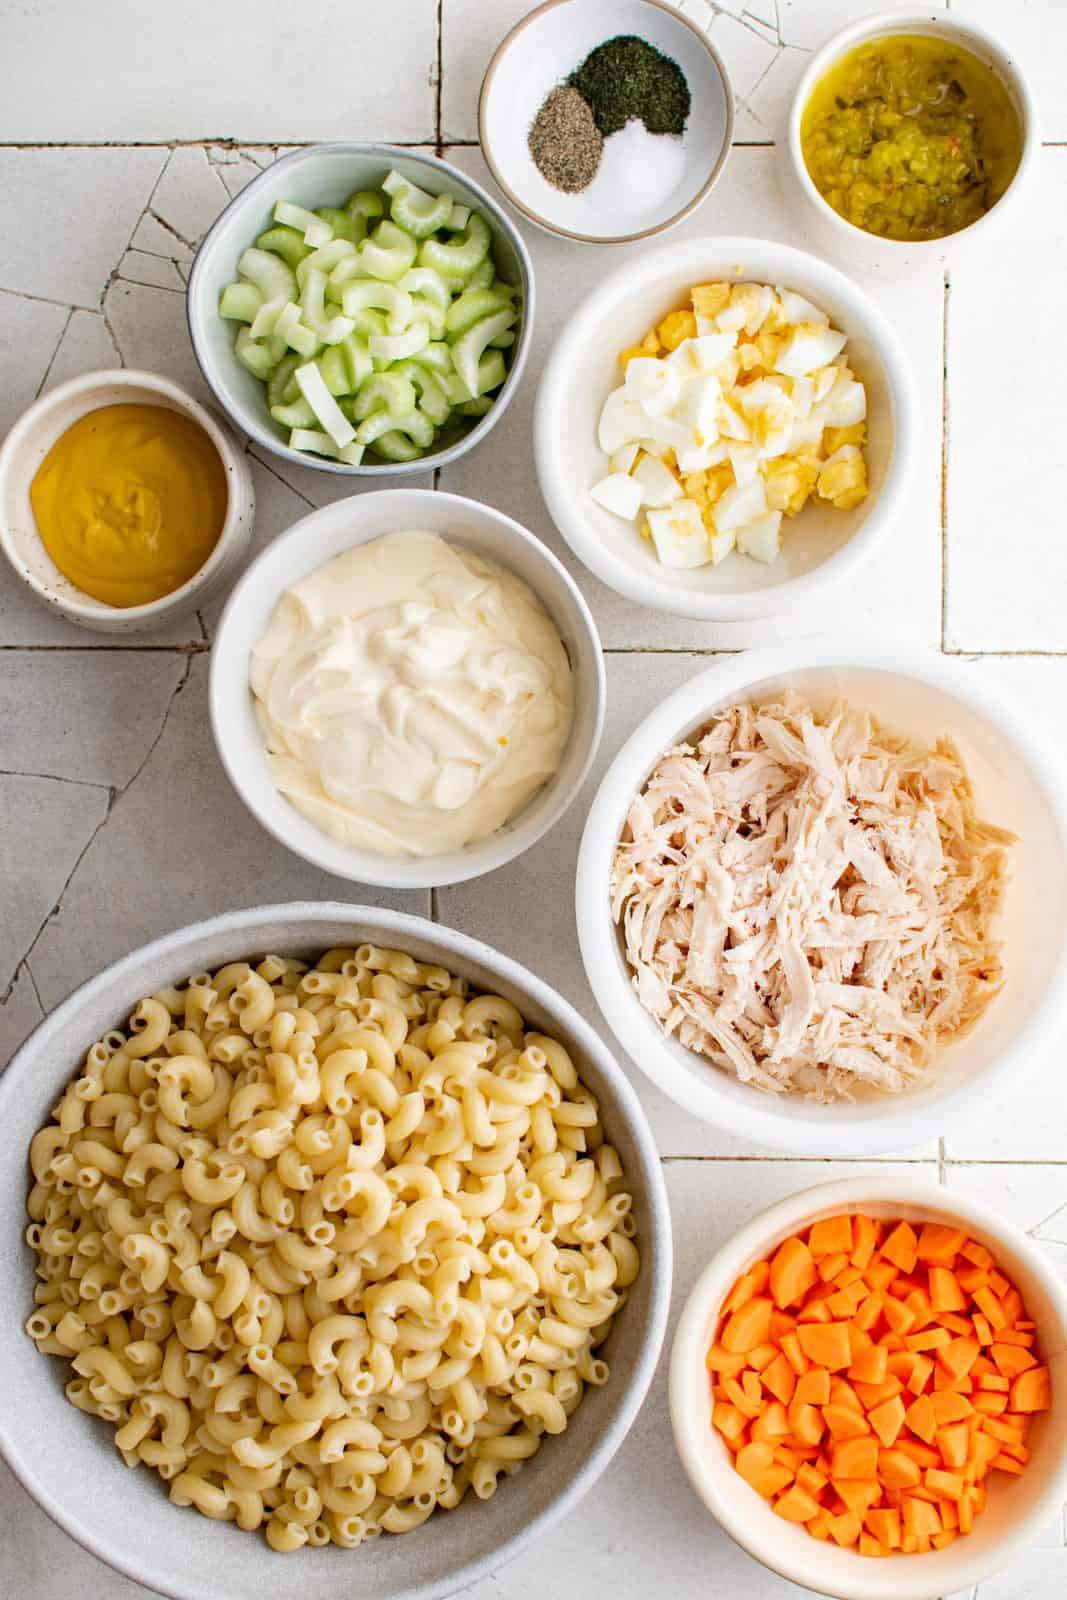 Ingredients needed: mayonnaise, yellow mustard, dill pickle relish, dried dill, salt, pepper, celery, hard-boiled eggs, carrots, shredded chicken and macaroni pasta.